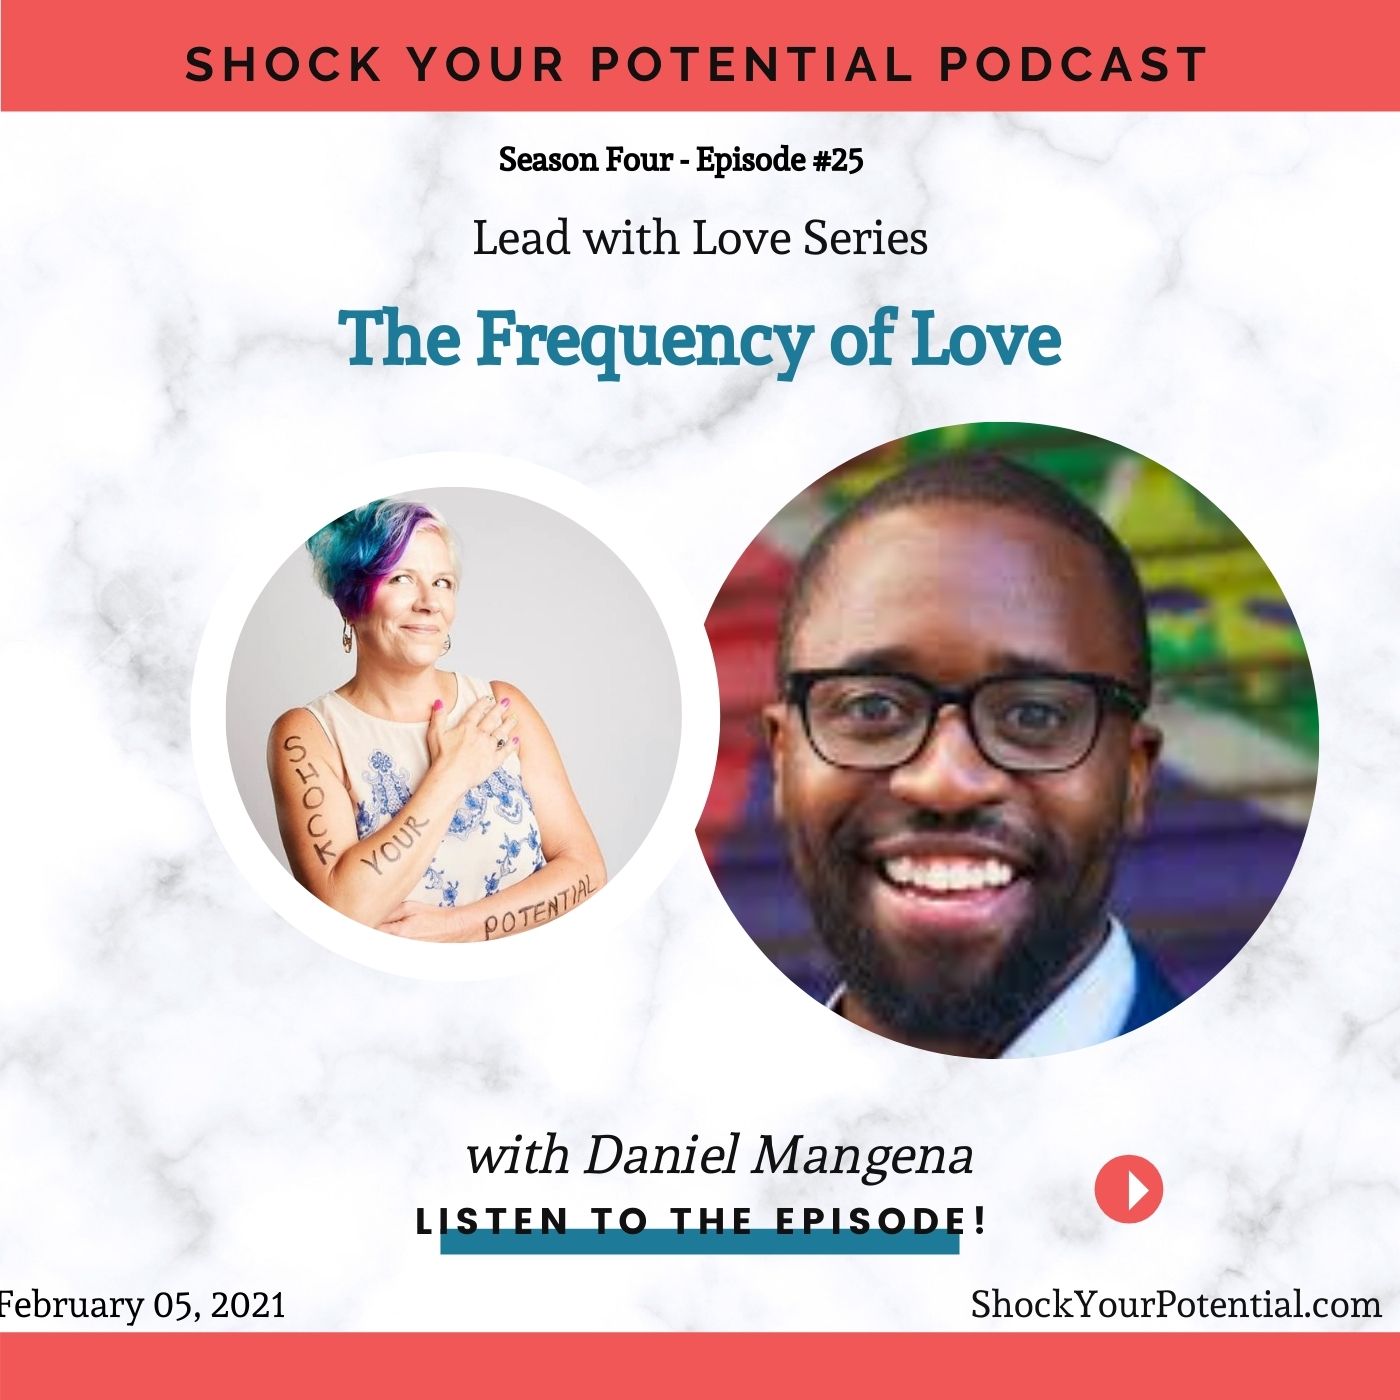 The Frequency of Love – Daniel Mangena